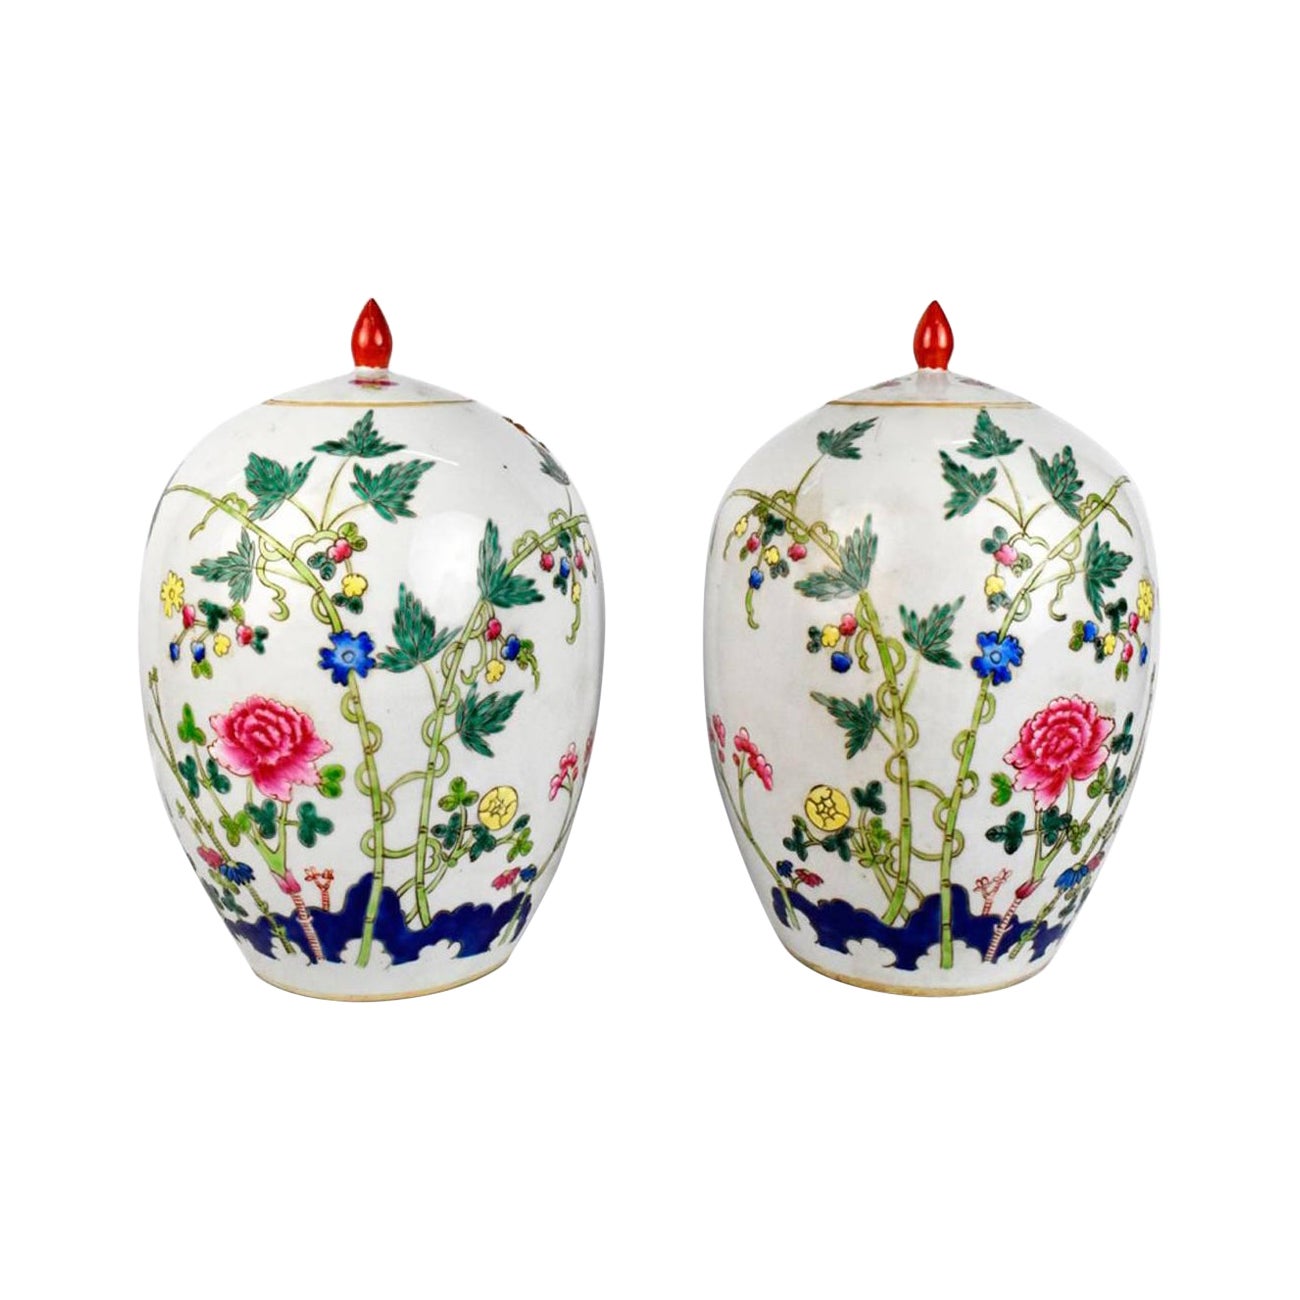 1950s, Pair of Oriental Urns with Flower Decorations